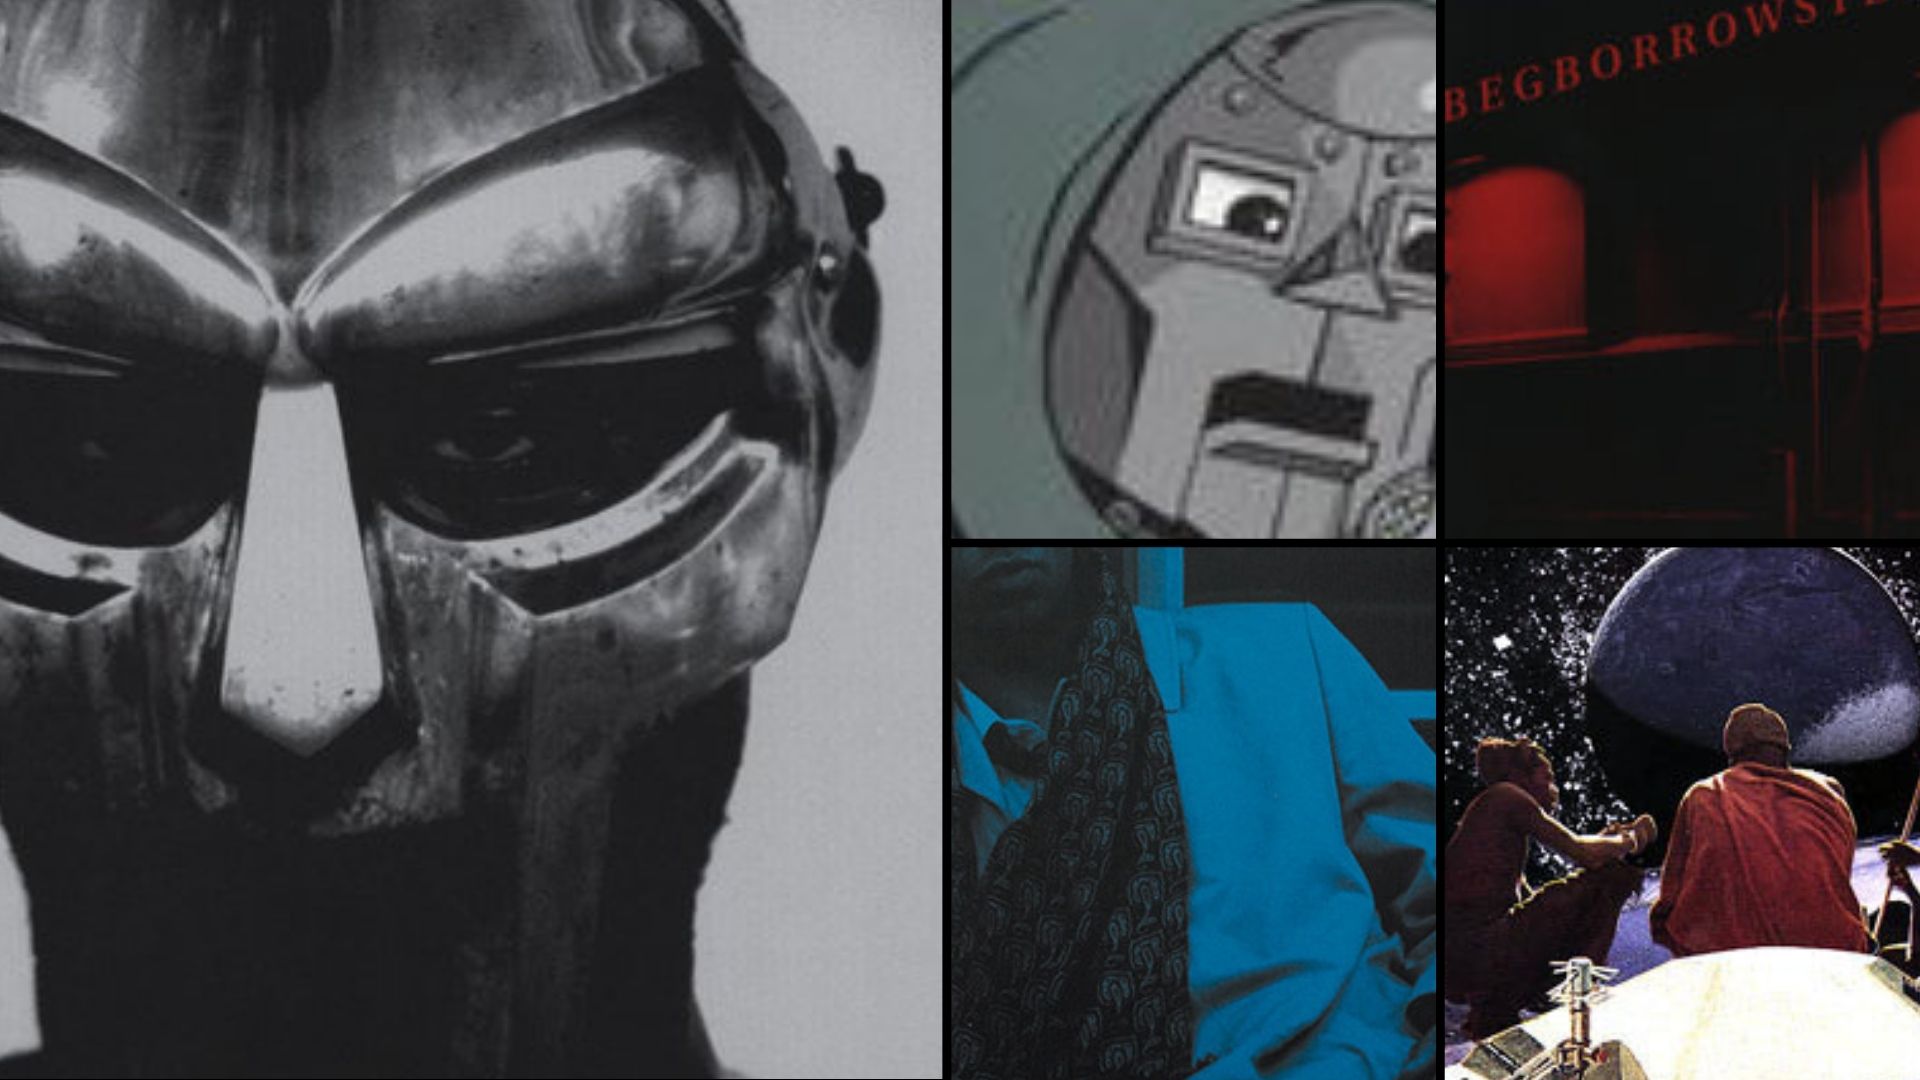 A Book About MF DOOM & Madlib's 'Madvillainy' Album Is Coming